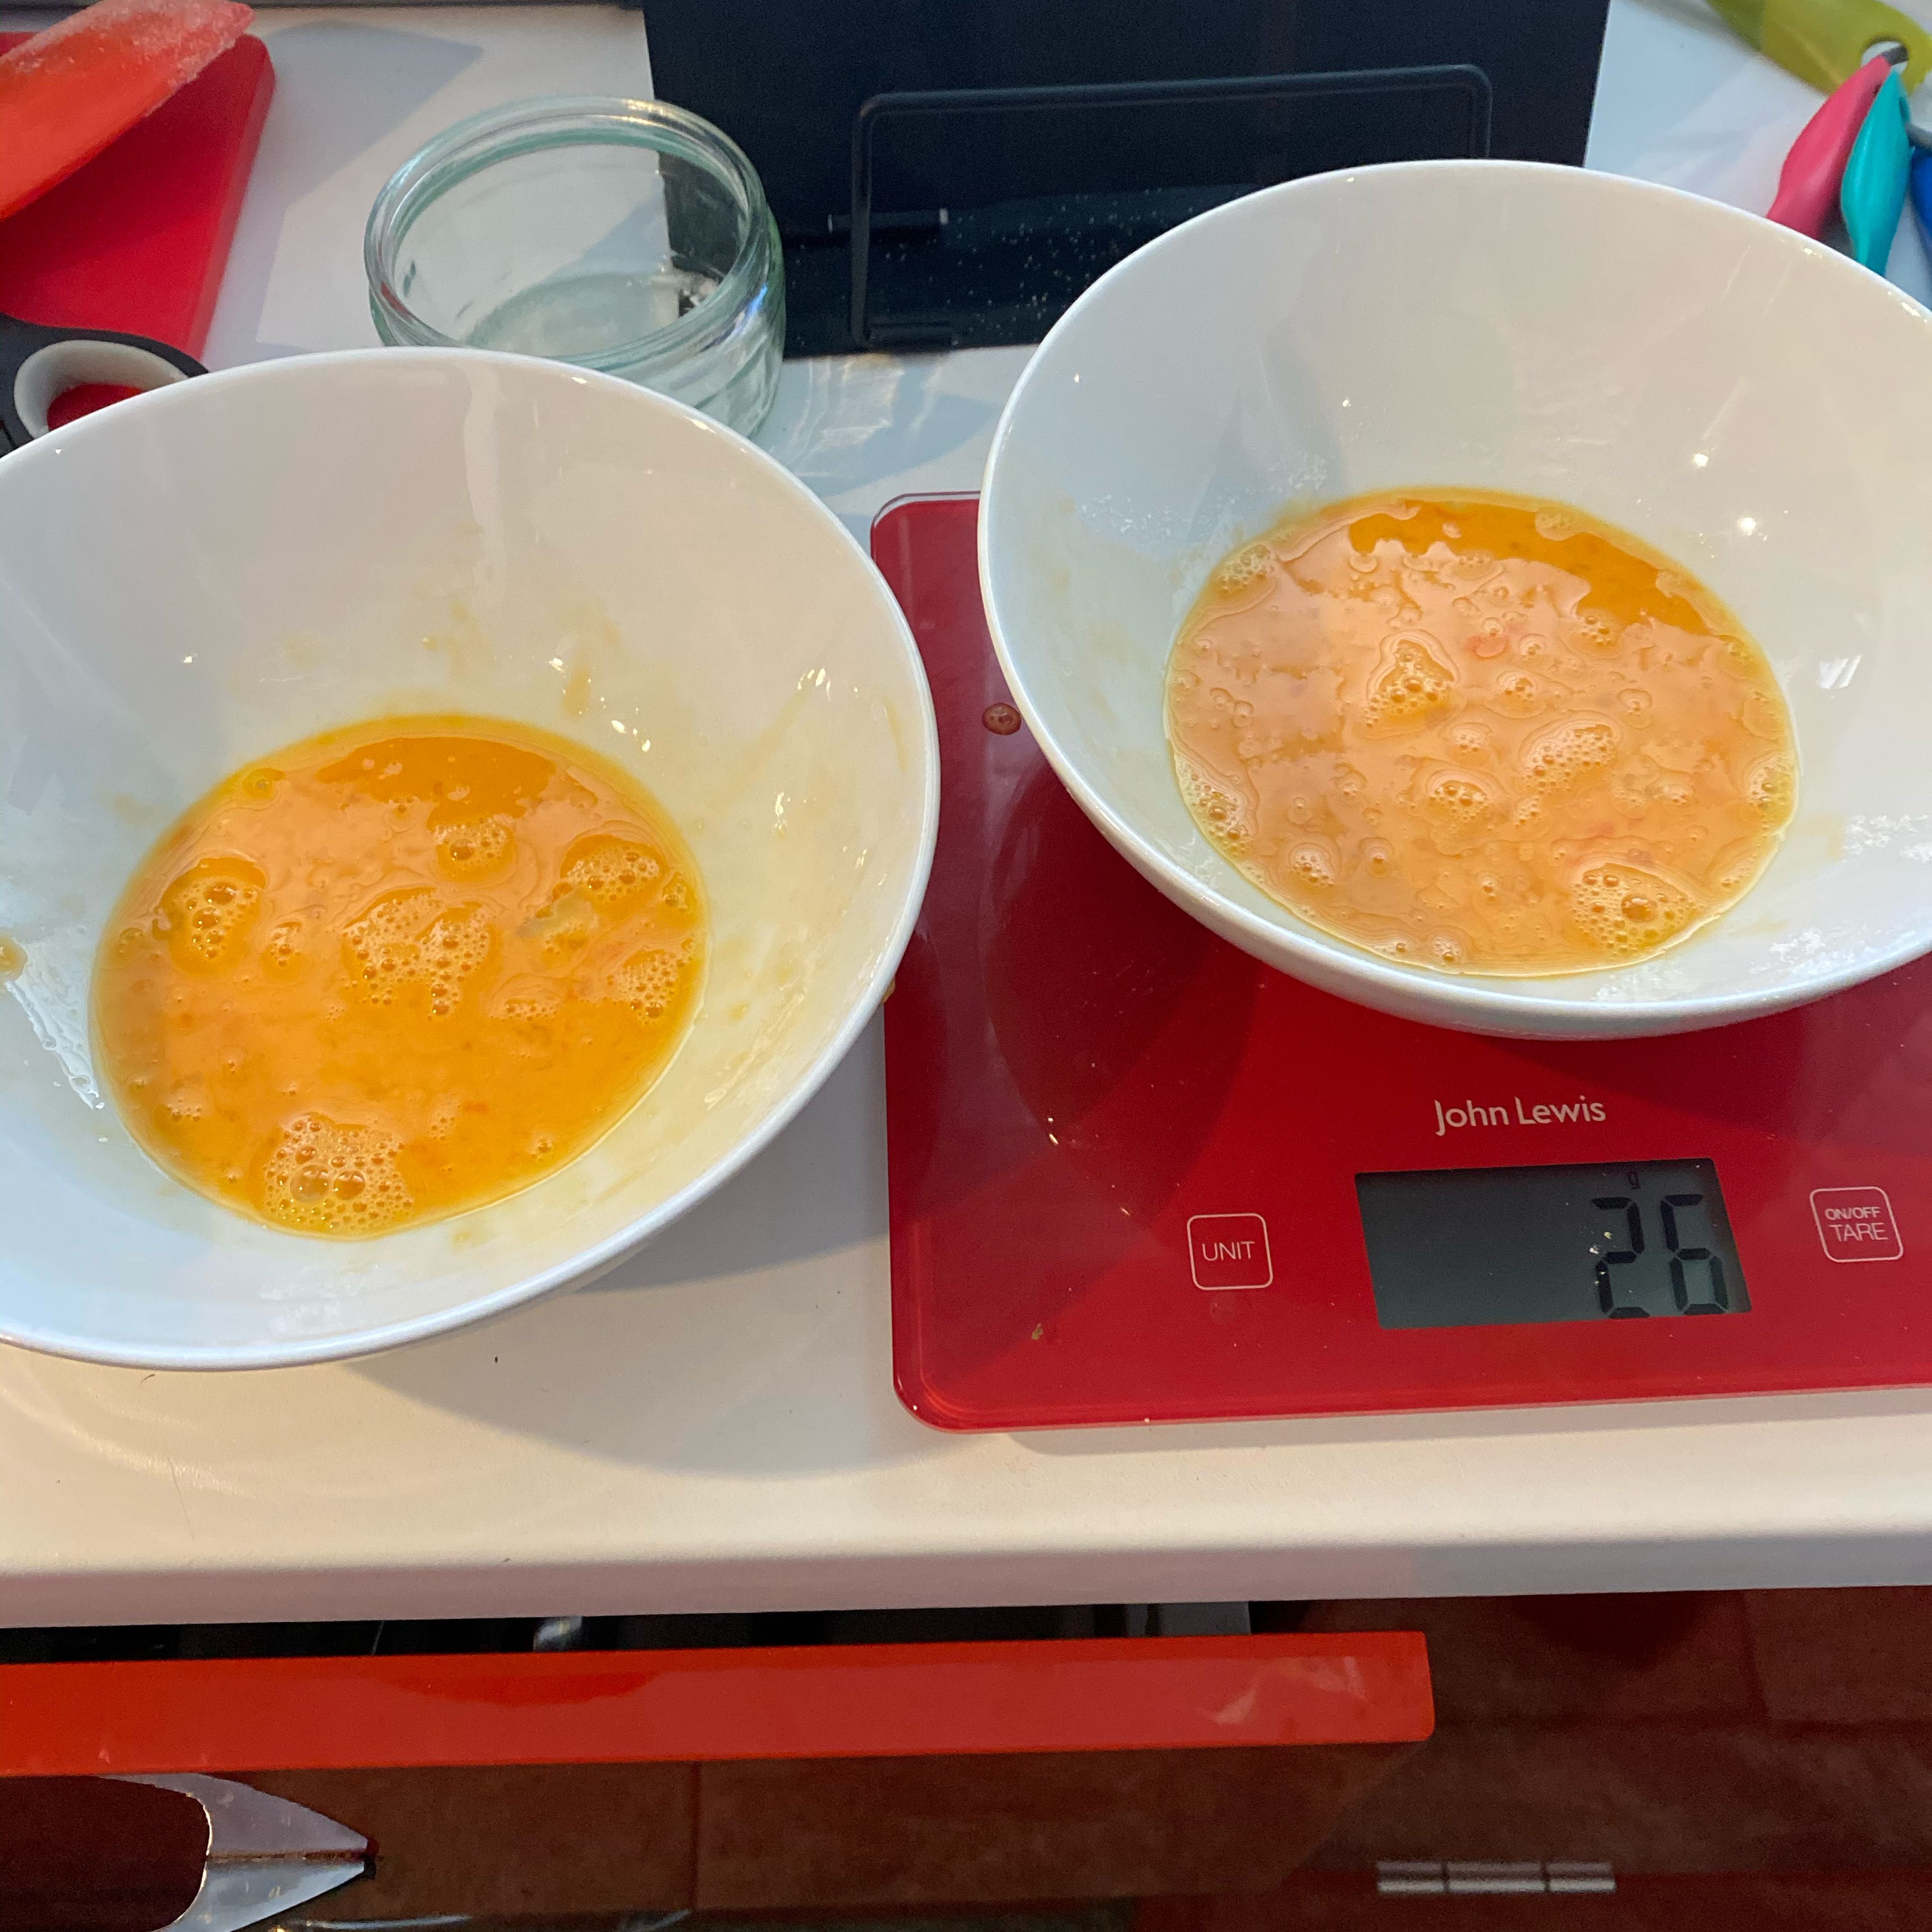 Mix one egg and divide it into two. About 25g each half.